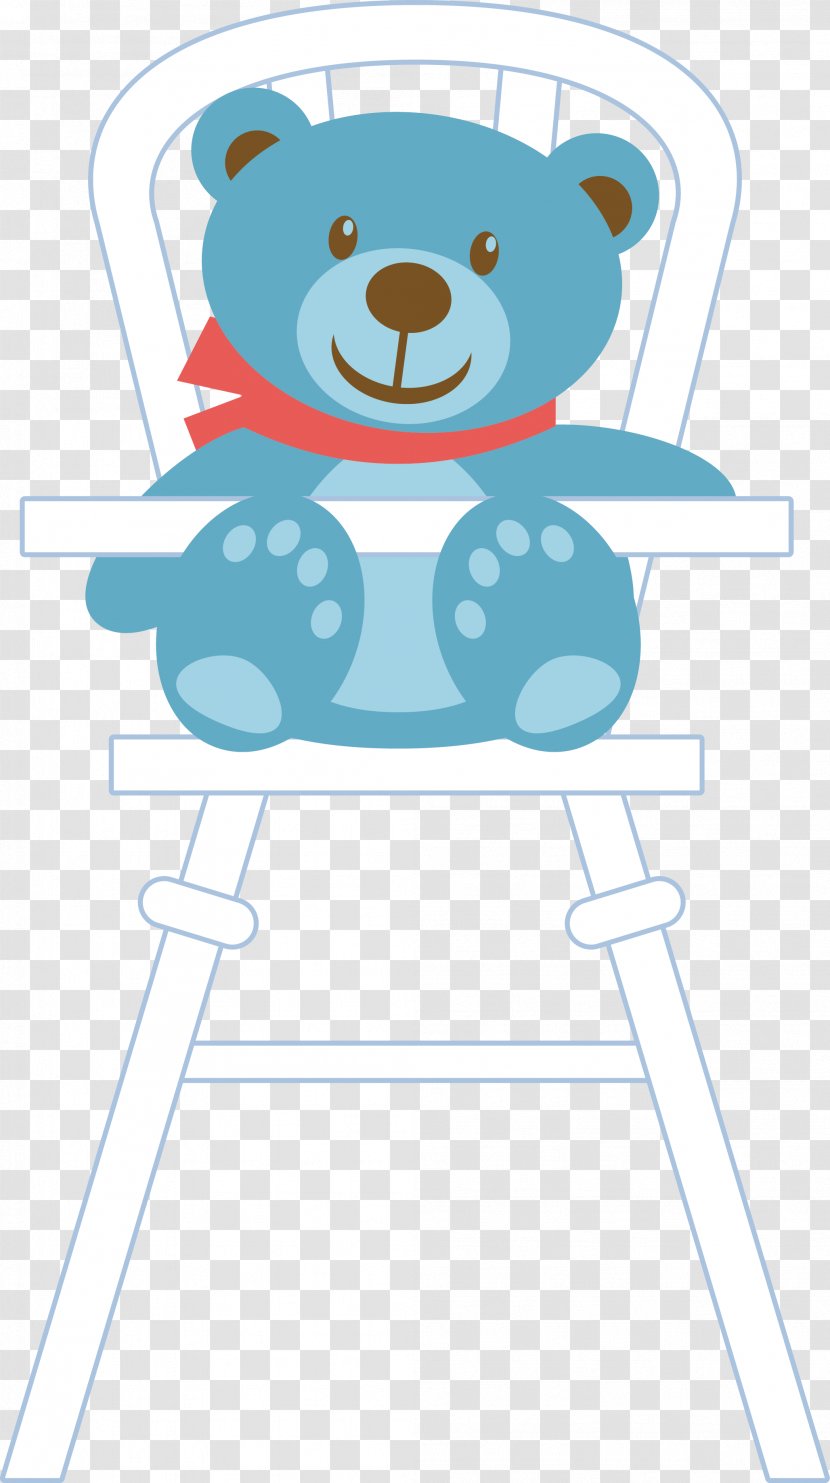 Bear Chair Toy - Frame - Vector Sitting On A Transparent PNG